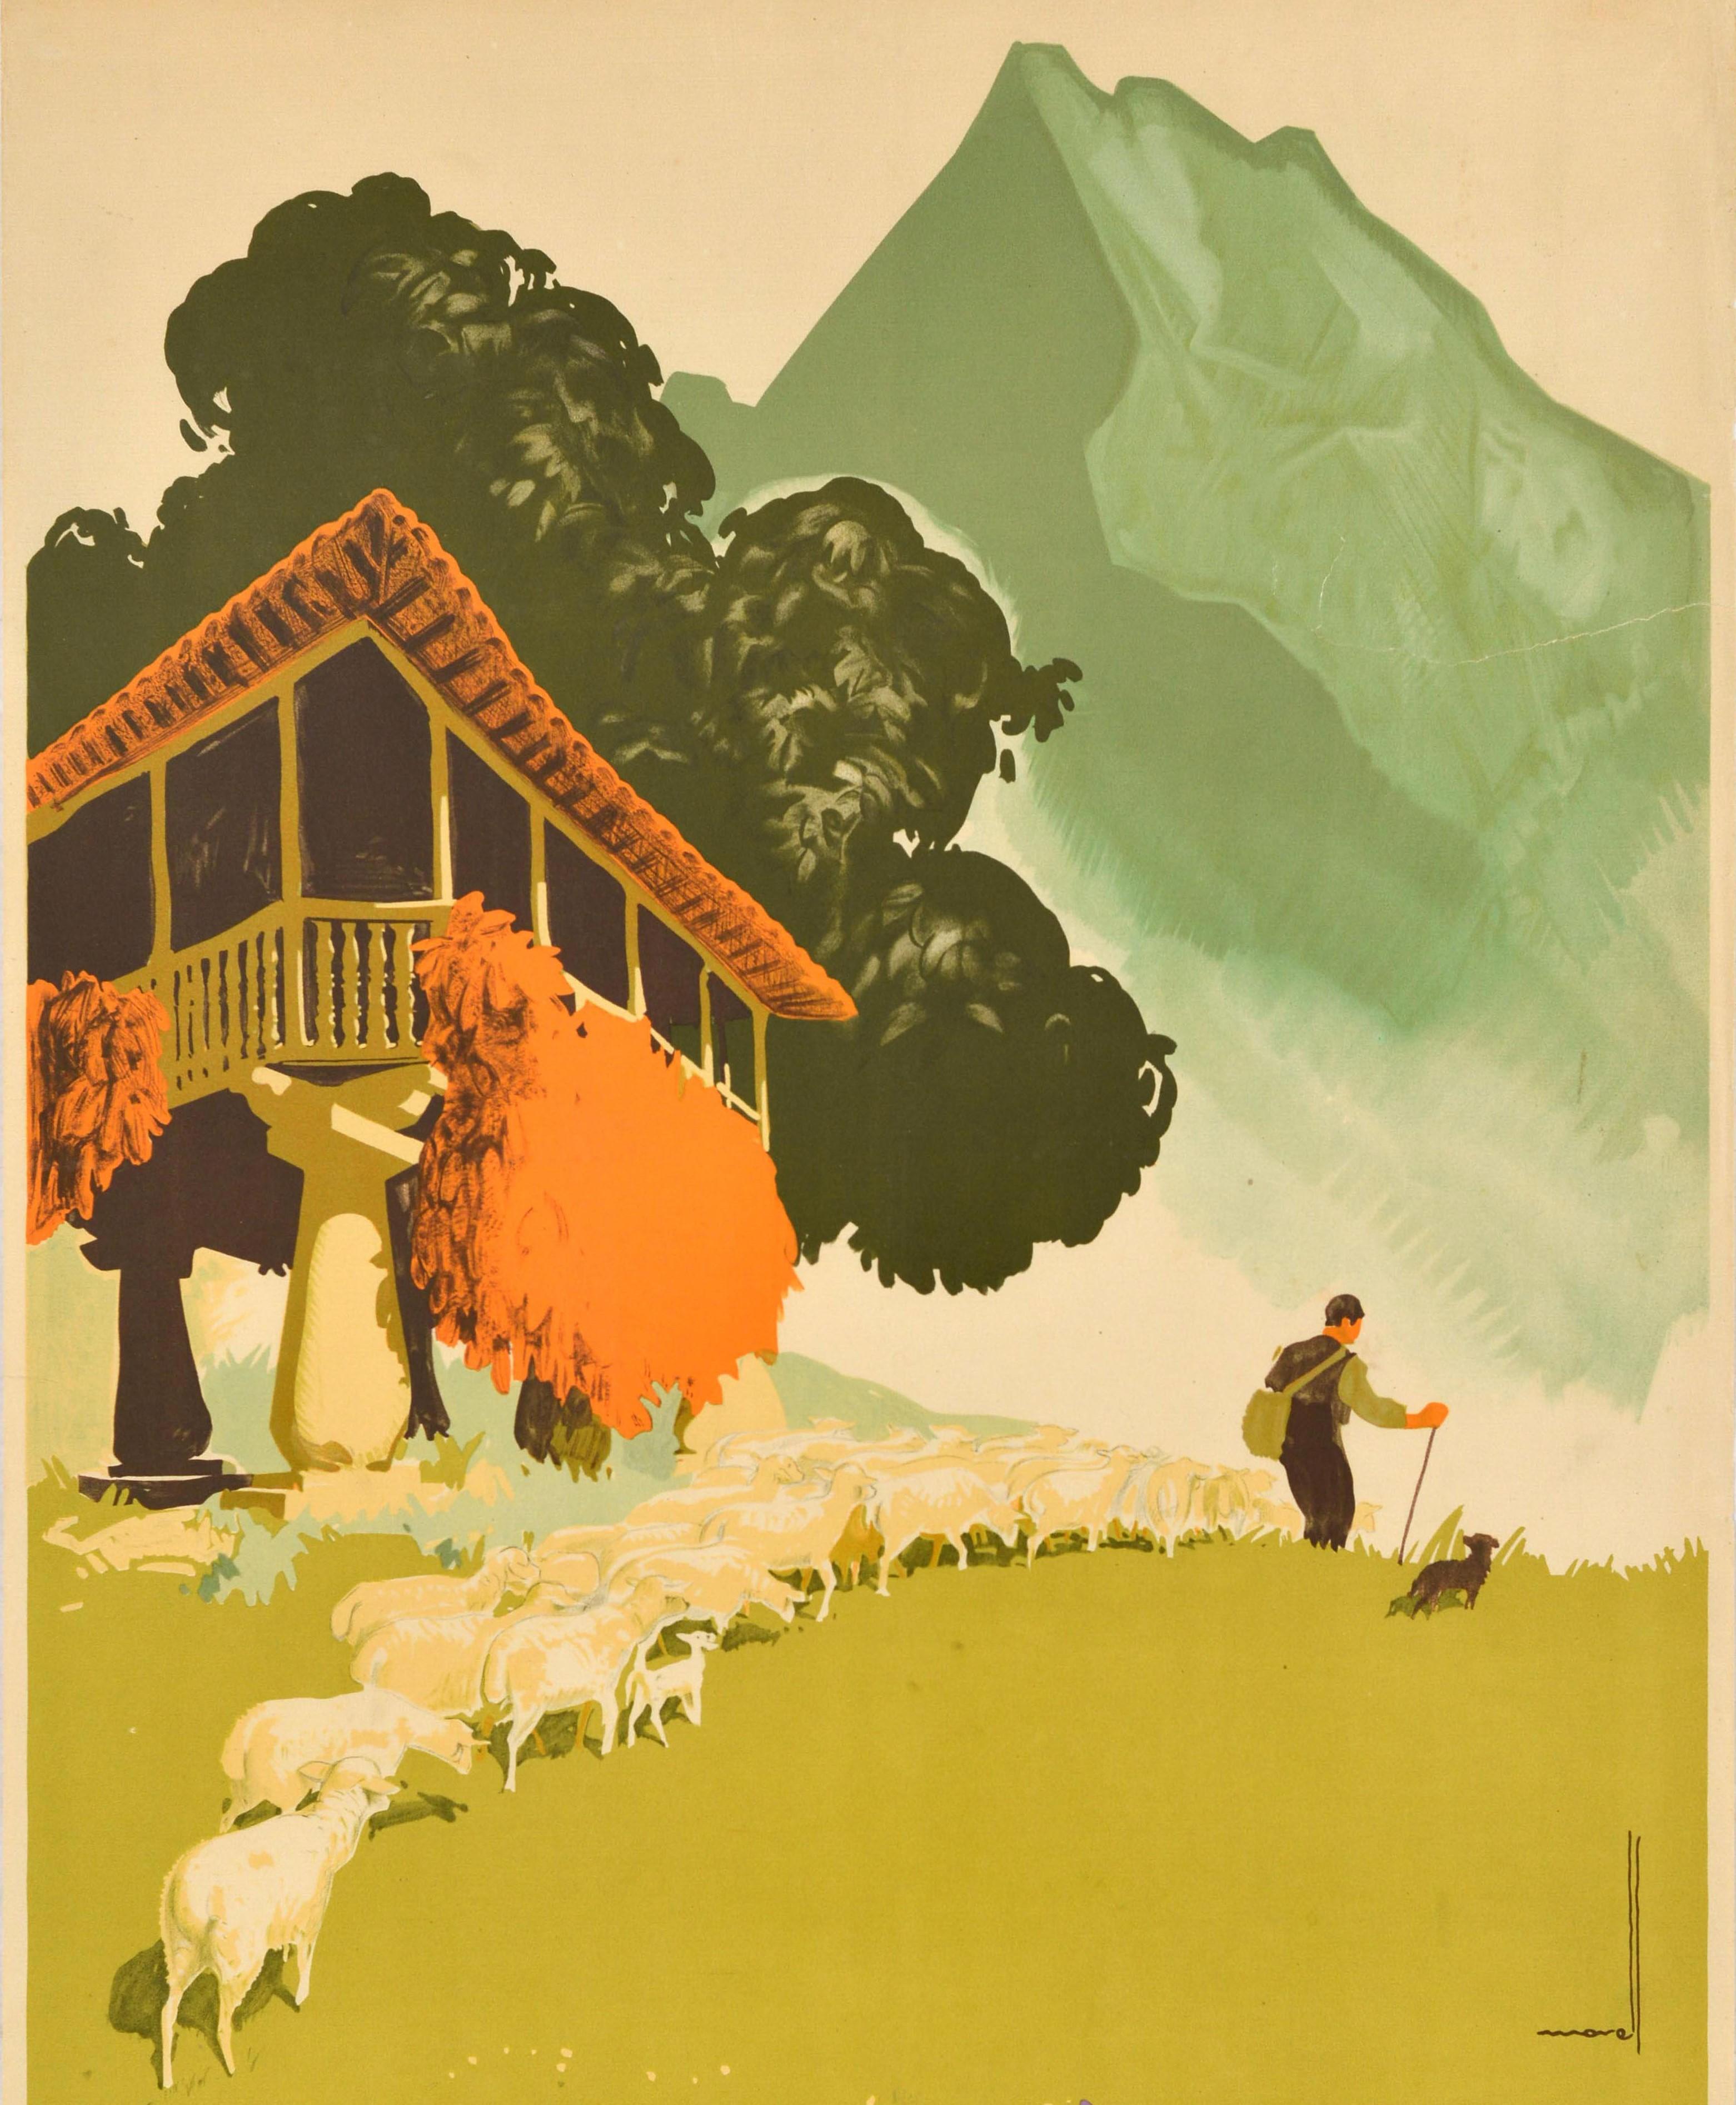 Original vintage travel advertising poster for Asturias in Spain featuring an illustration by the Spanish artist Jose Morell (1899-1949) depicting a farmer with his dog by his side herding a flock of sheep on a hill, flowers in the foreground around